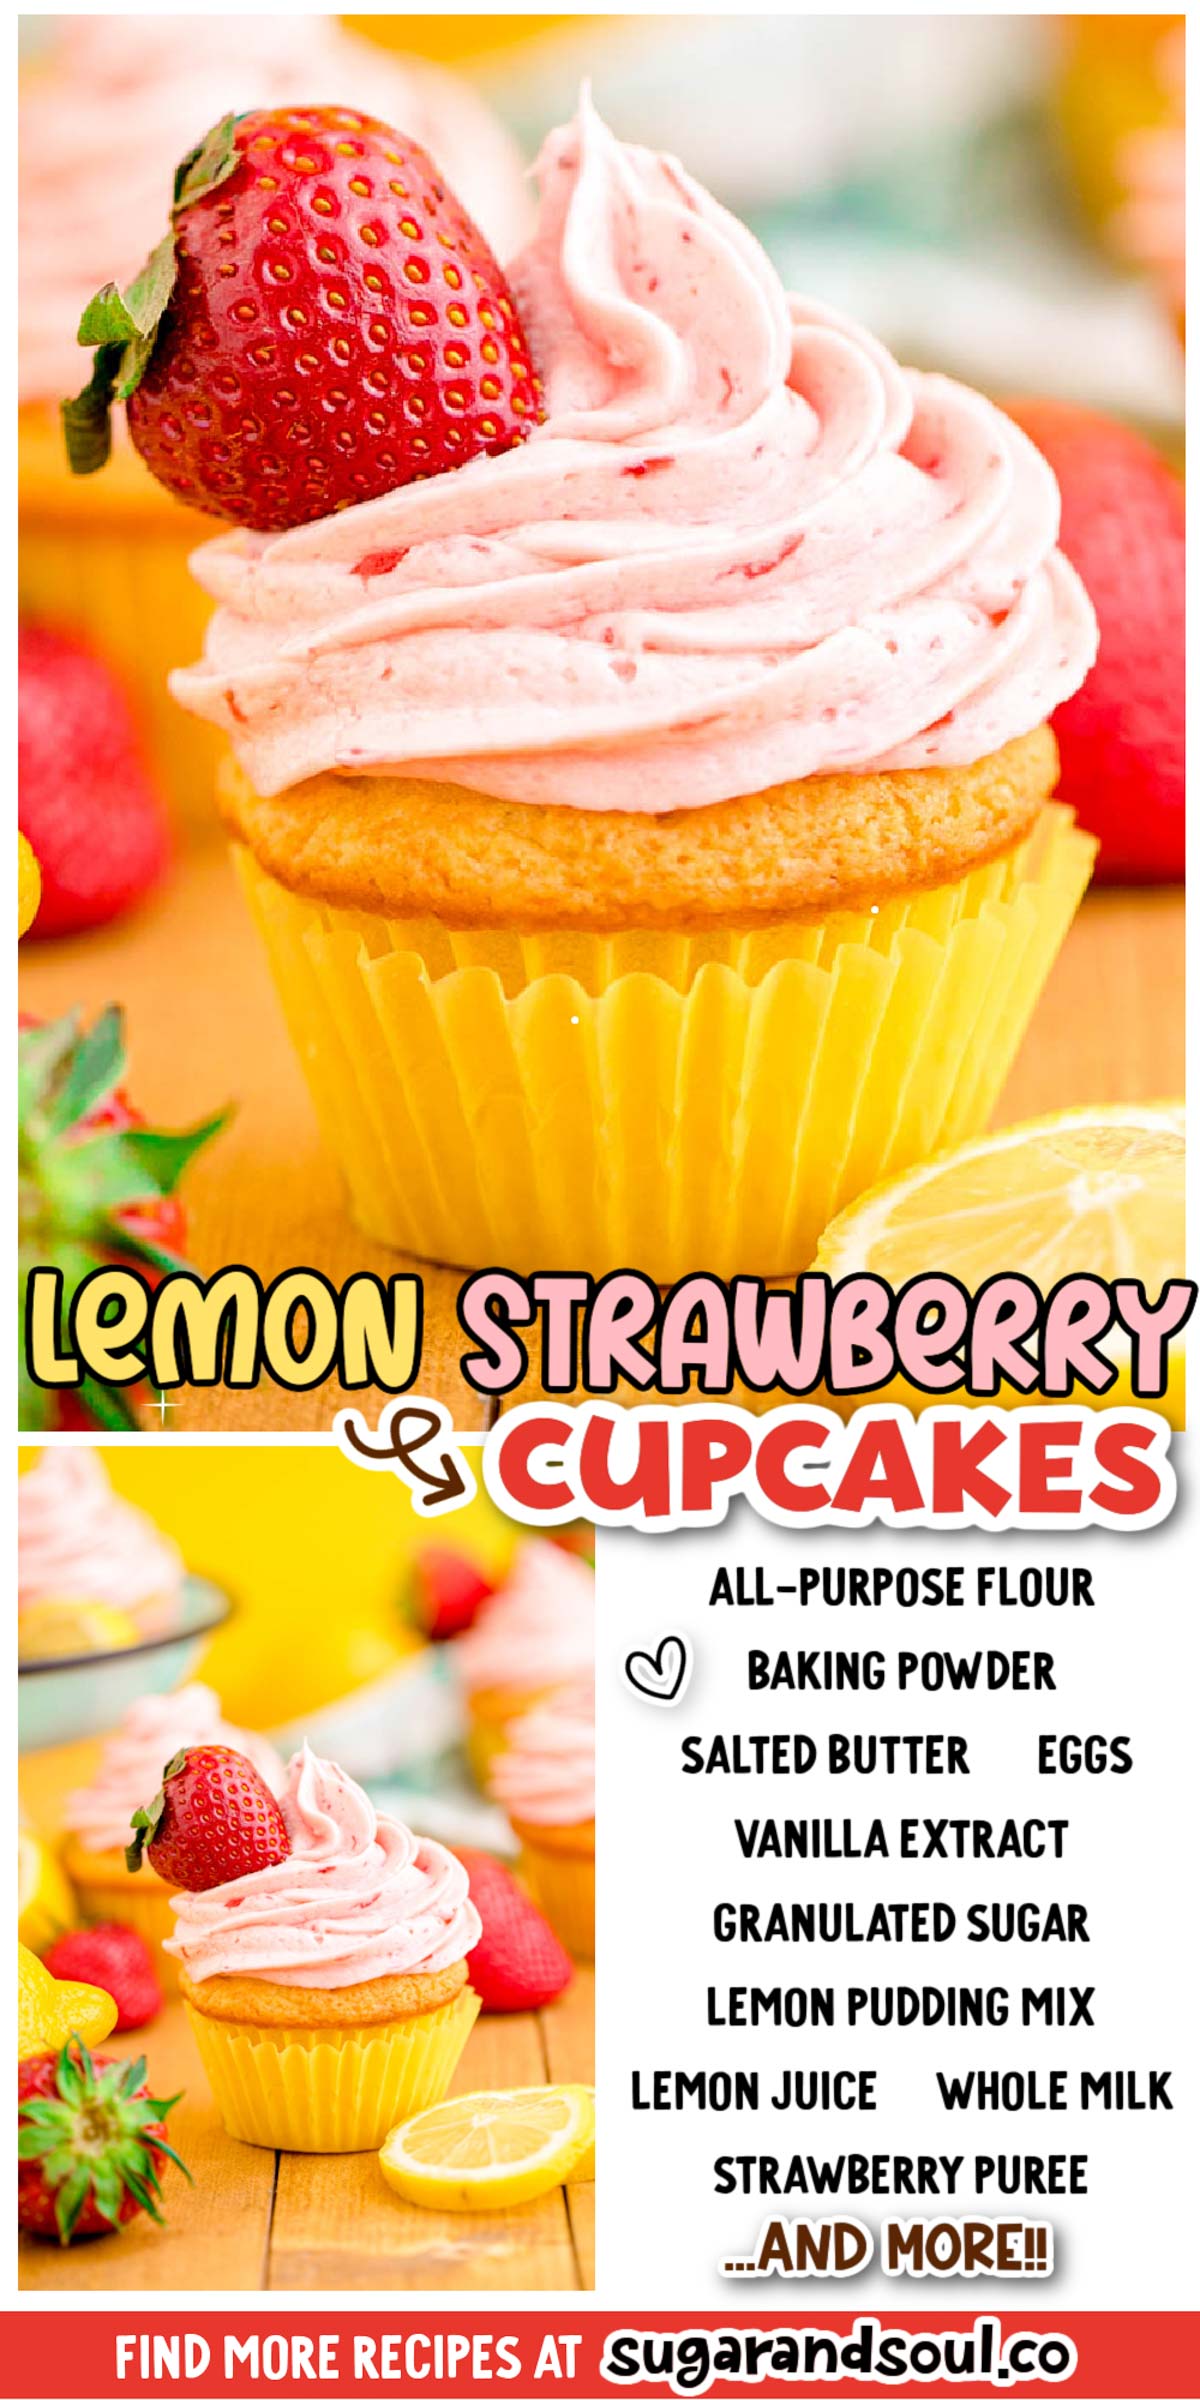 Lemon Cupcakes with Strawberry Buttercream are the ultimate summertime dessert with their bright lemon flavor and sweet strawberry frosting! A simple recipe that yields a dozen delicious cupcakes! via @sugarandsoulco